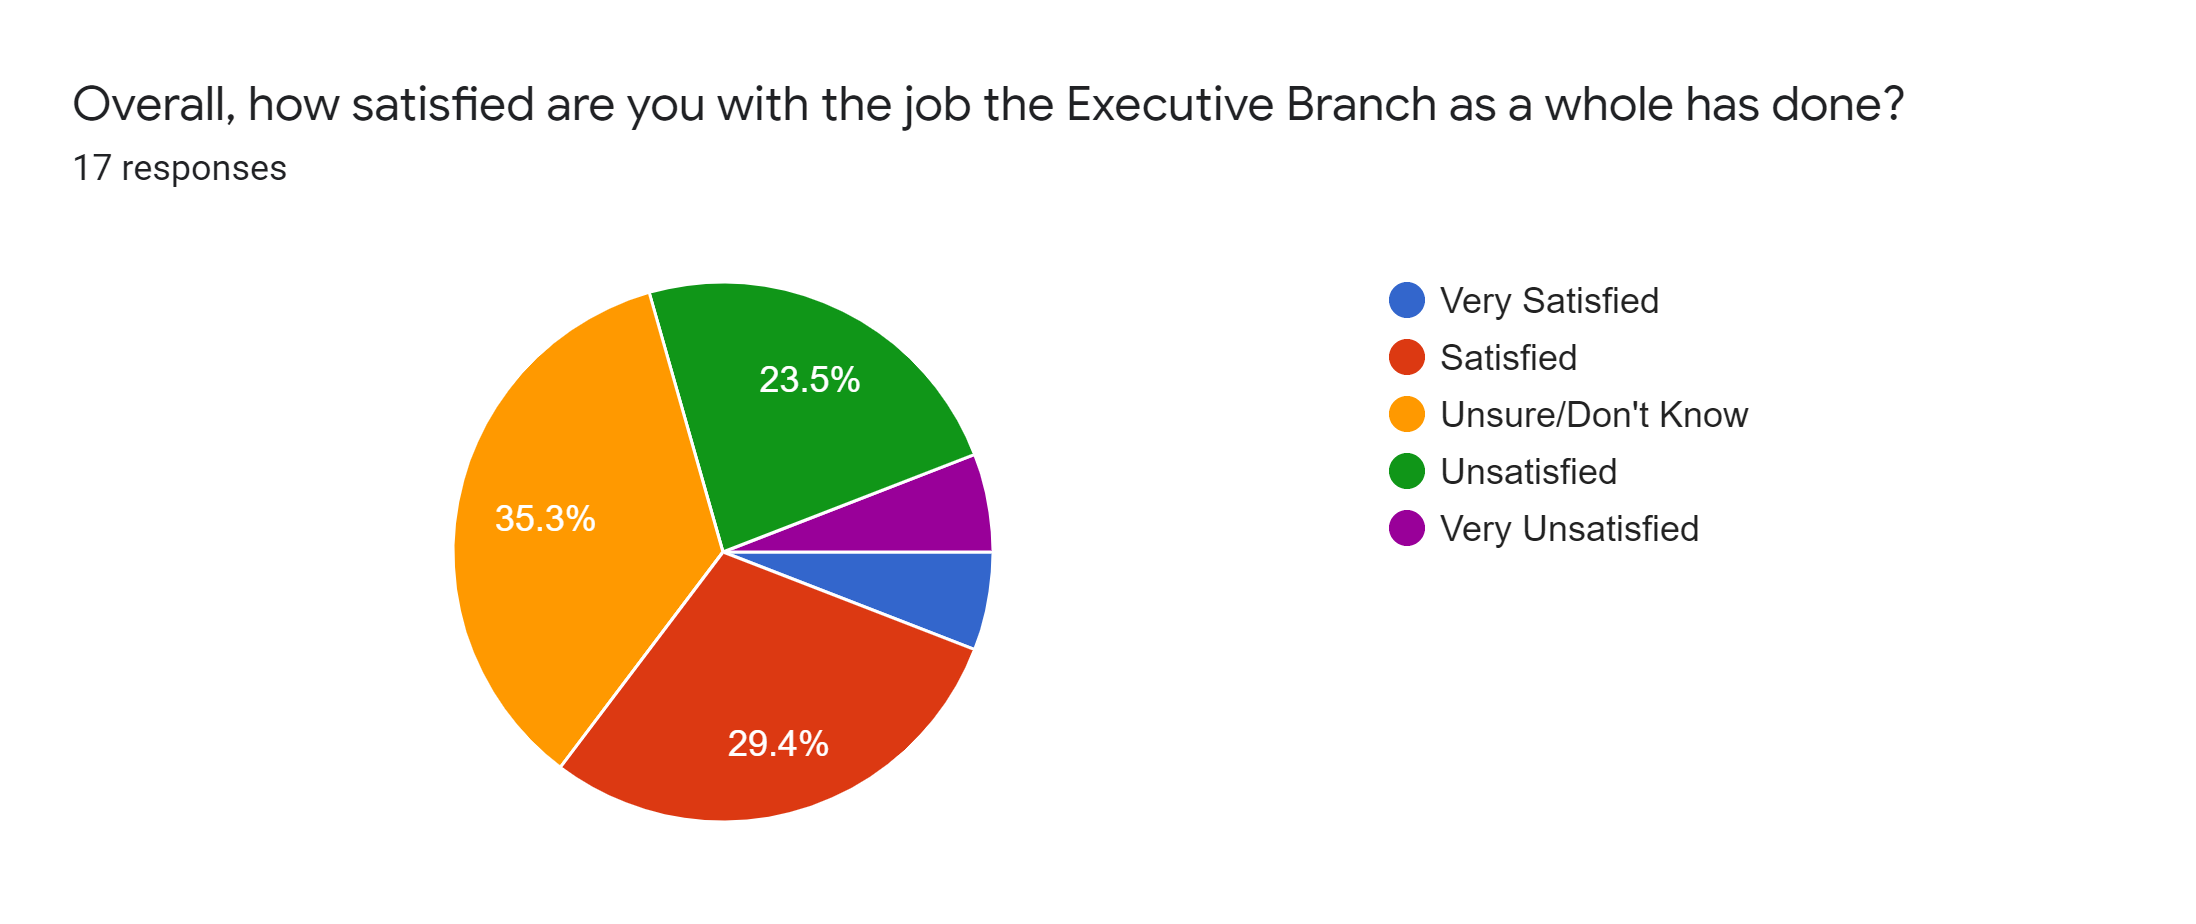 Forms response chart. Question title: Overall, how satisfied are you with the job the Executive Branch as a whole has done?. Number of responses: 17 responses.